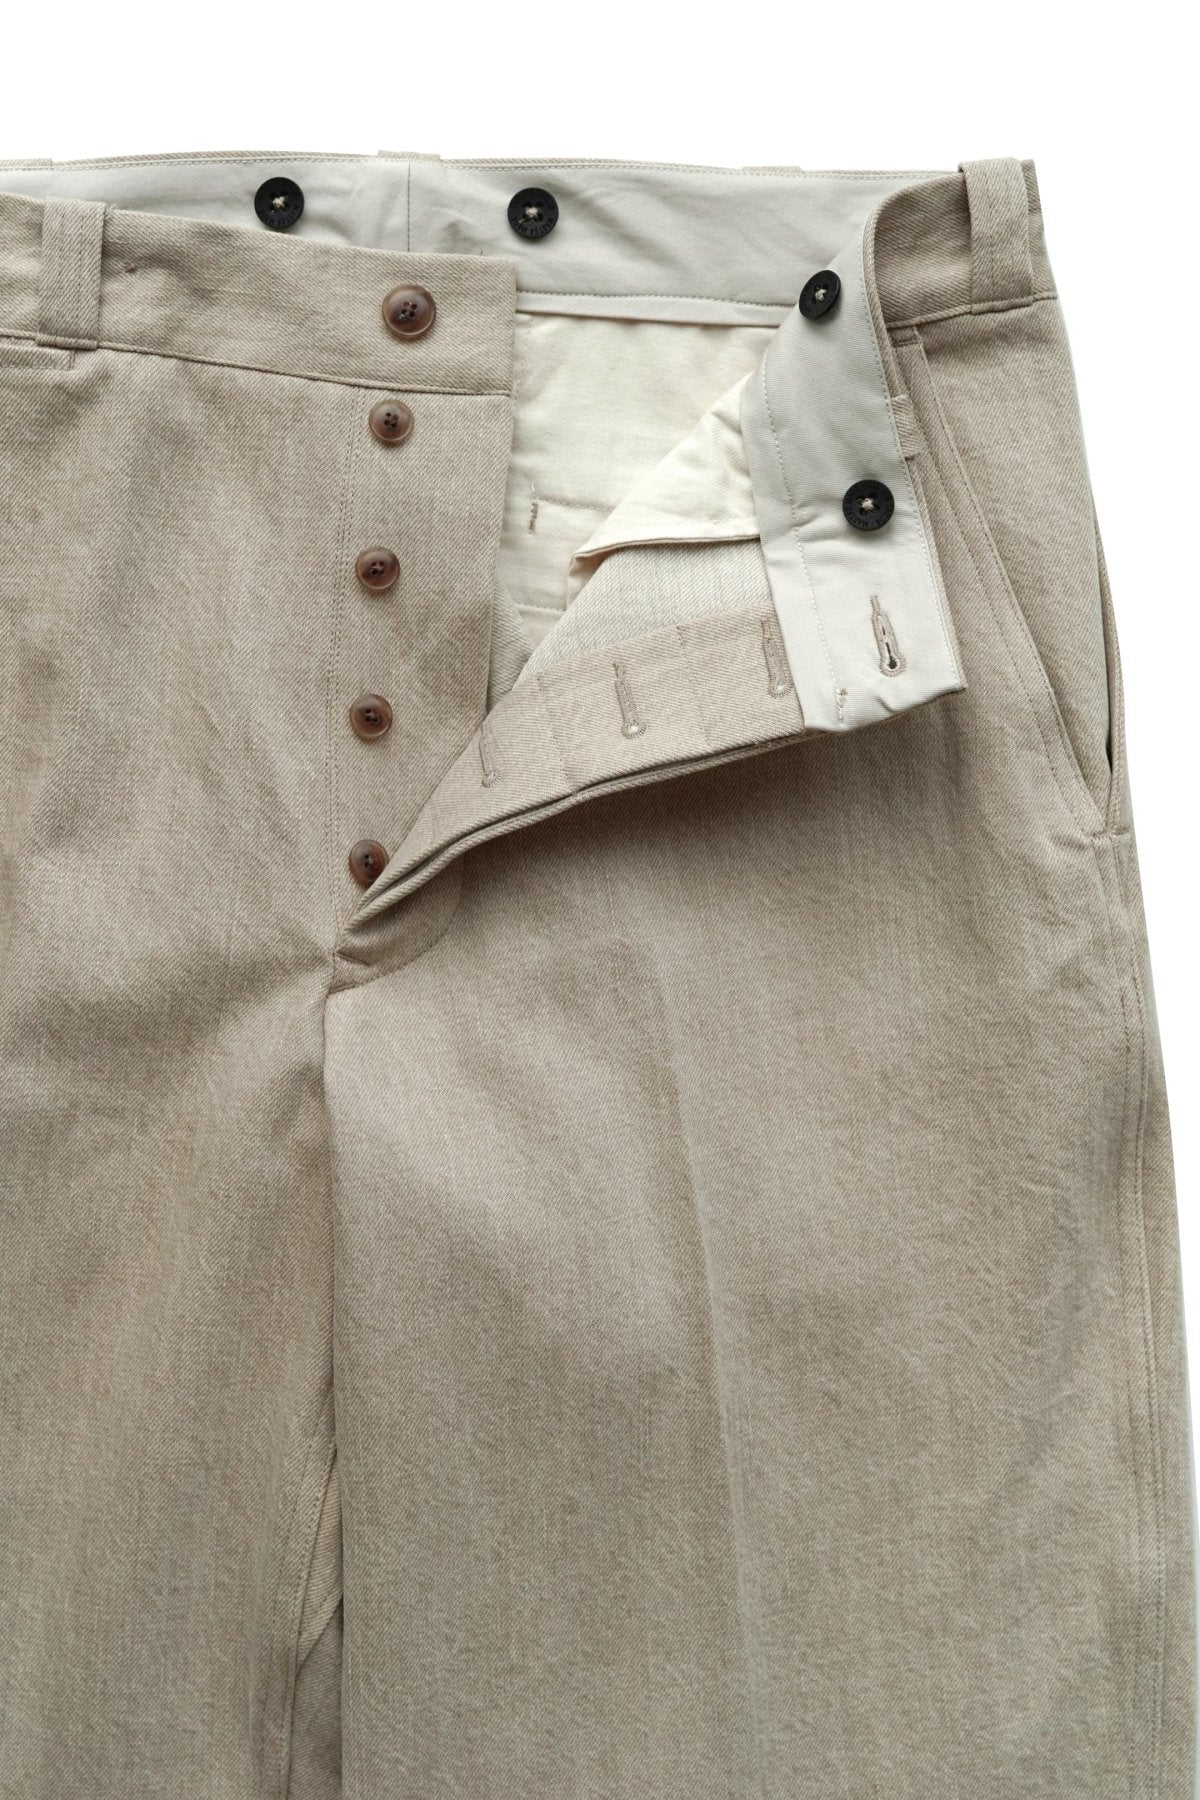 OLD JOE & CO. SPRIT POCKET TROUSER – unexpected store